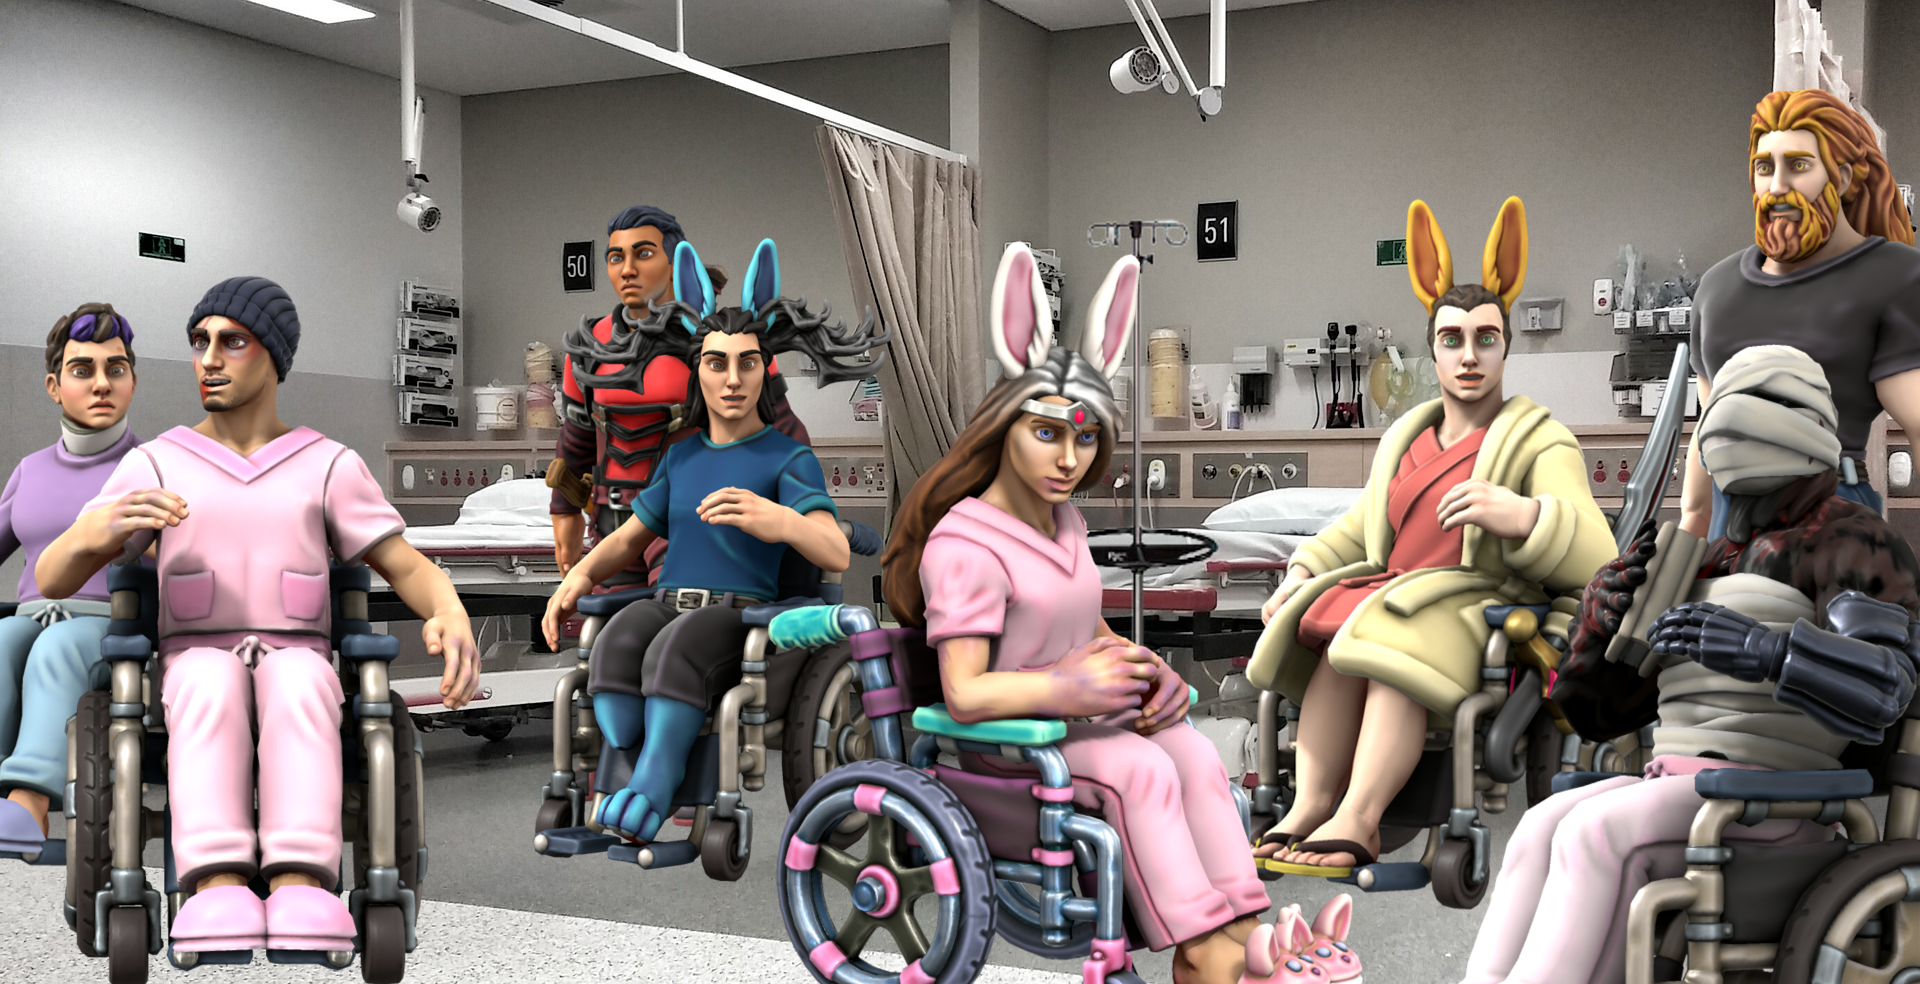 Several people in a hospital in wheelchairs, some with rabbit ears